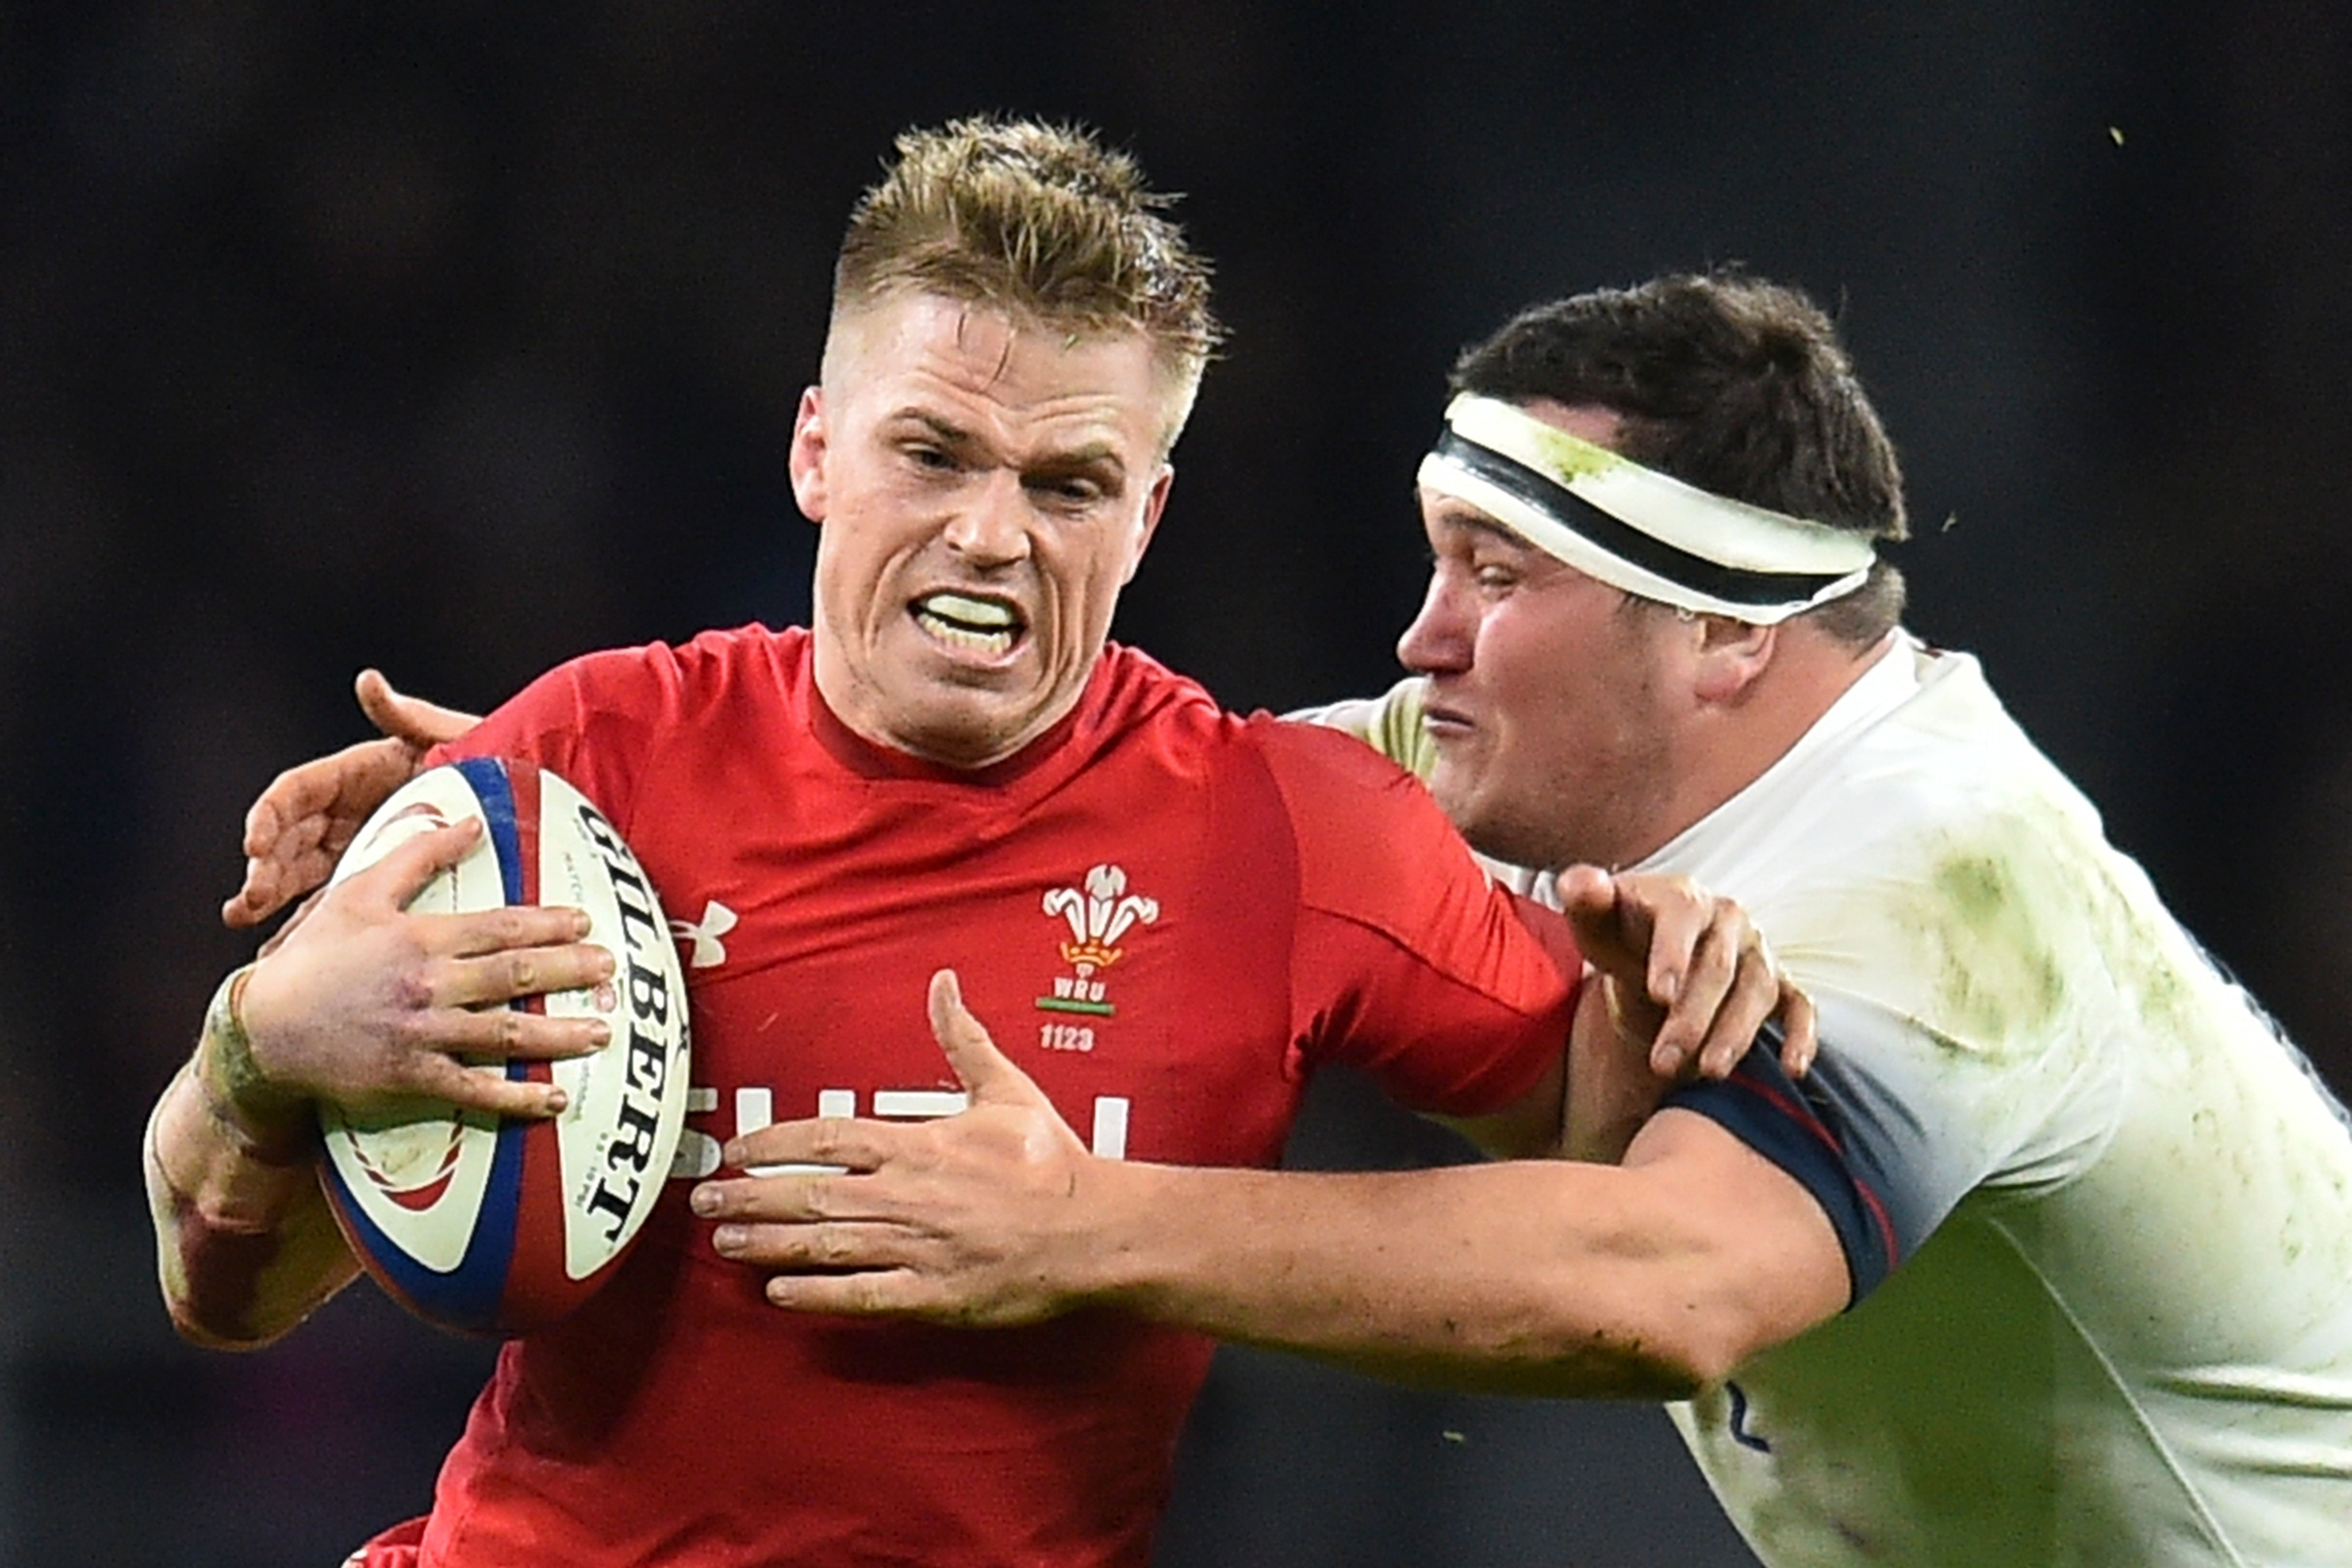 Gareth Anscombe’s disallowed try is the centre of much debate. Photo: AFP